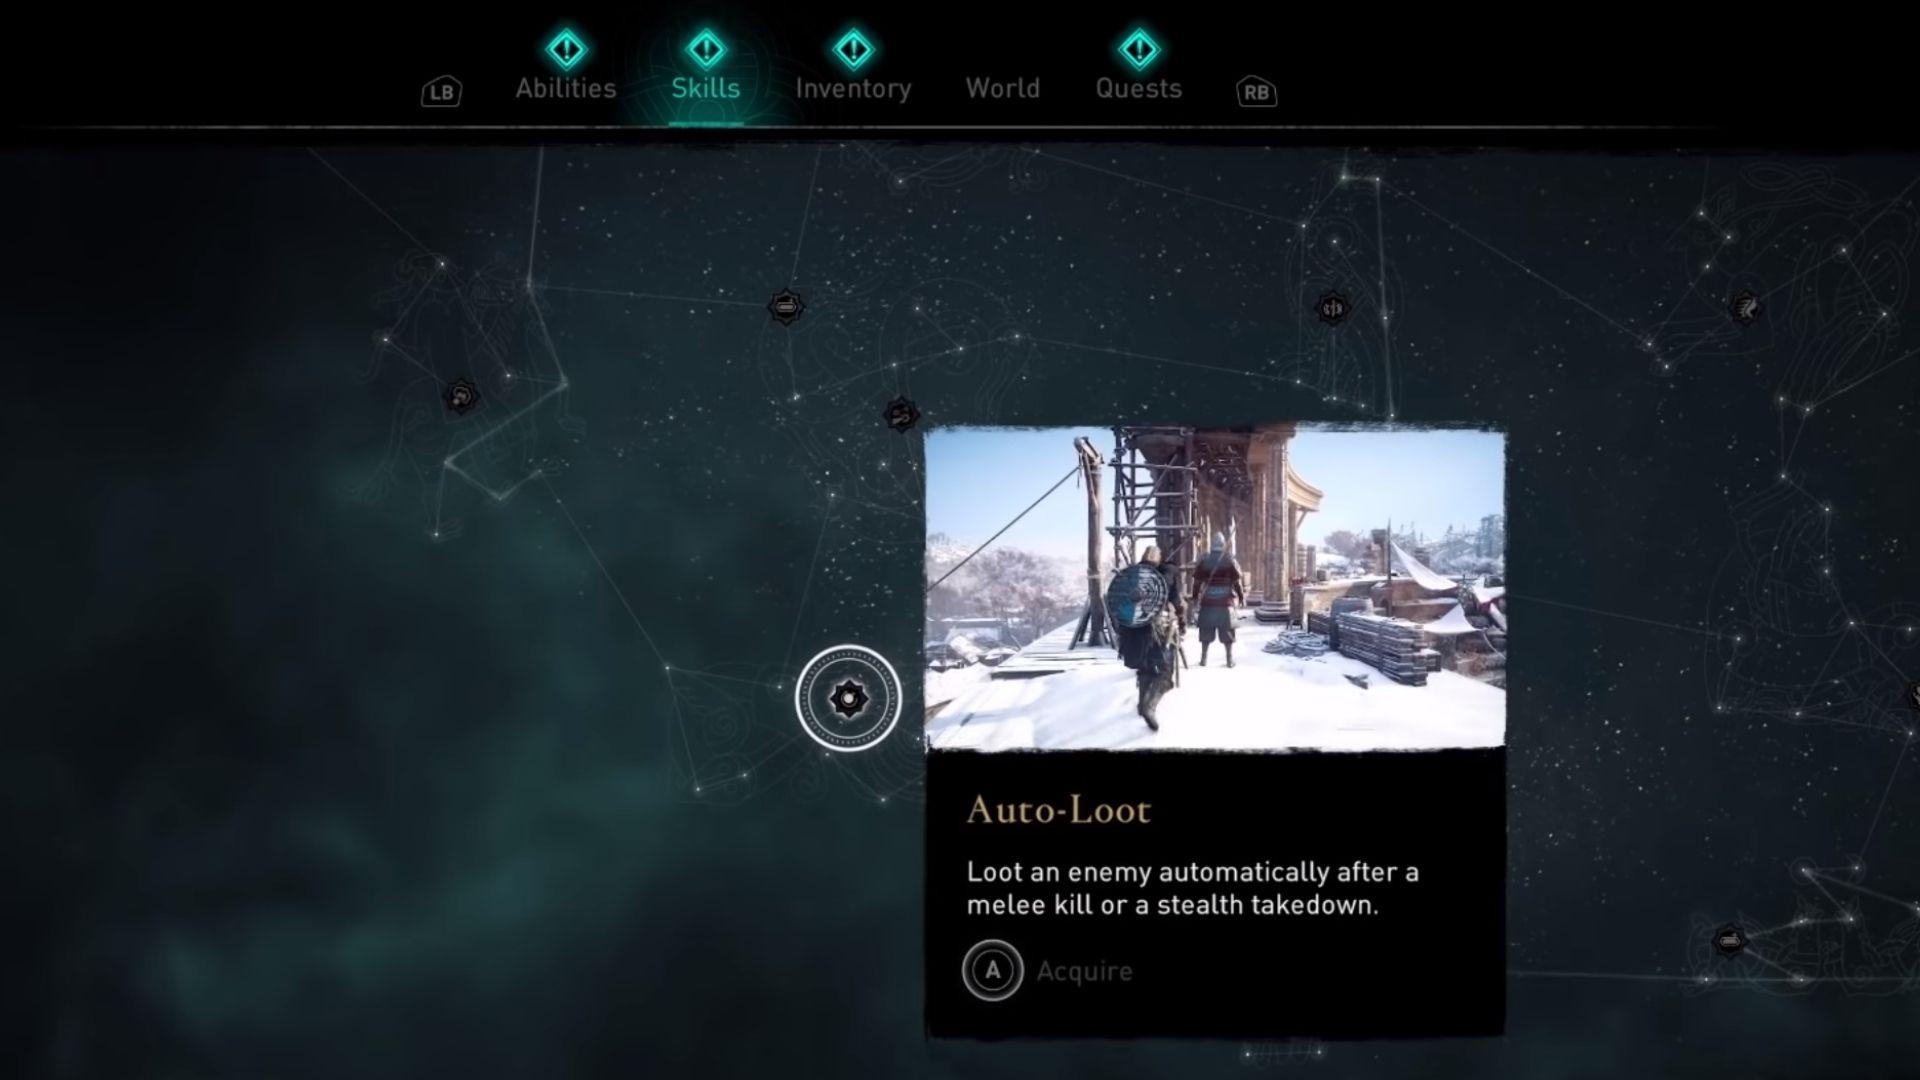 Assassin's Creed Valhalla has two essential skills: Auto-loot and